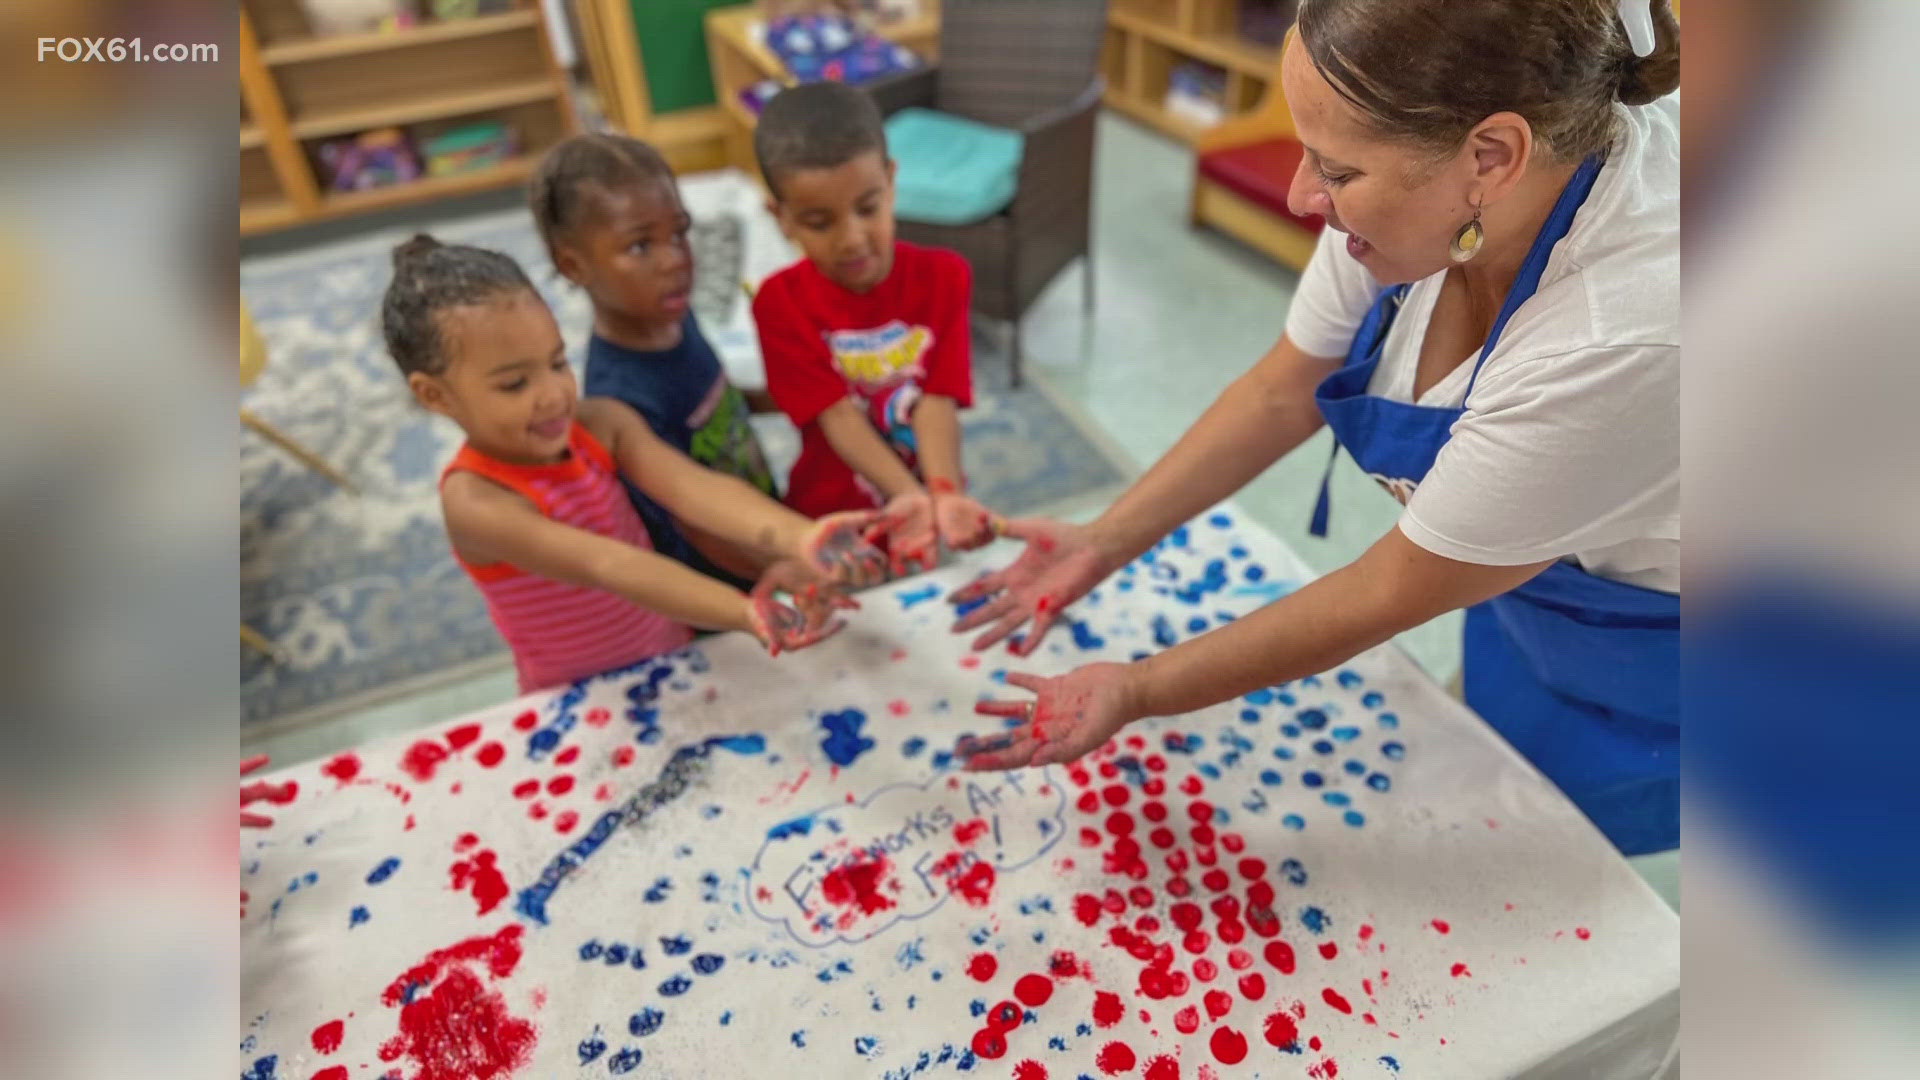 The CCDC in Hartford is celebrating the 4th of July with art in Hartford. The non-profit provides child care to children from 8 weeks to 5 years old.